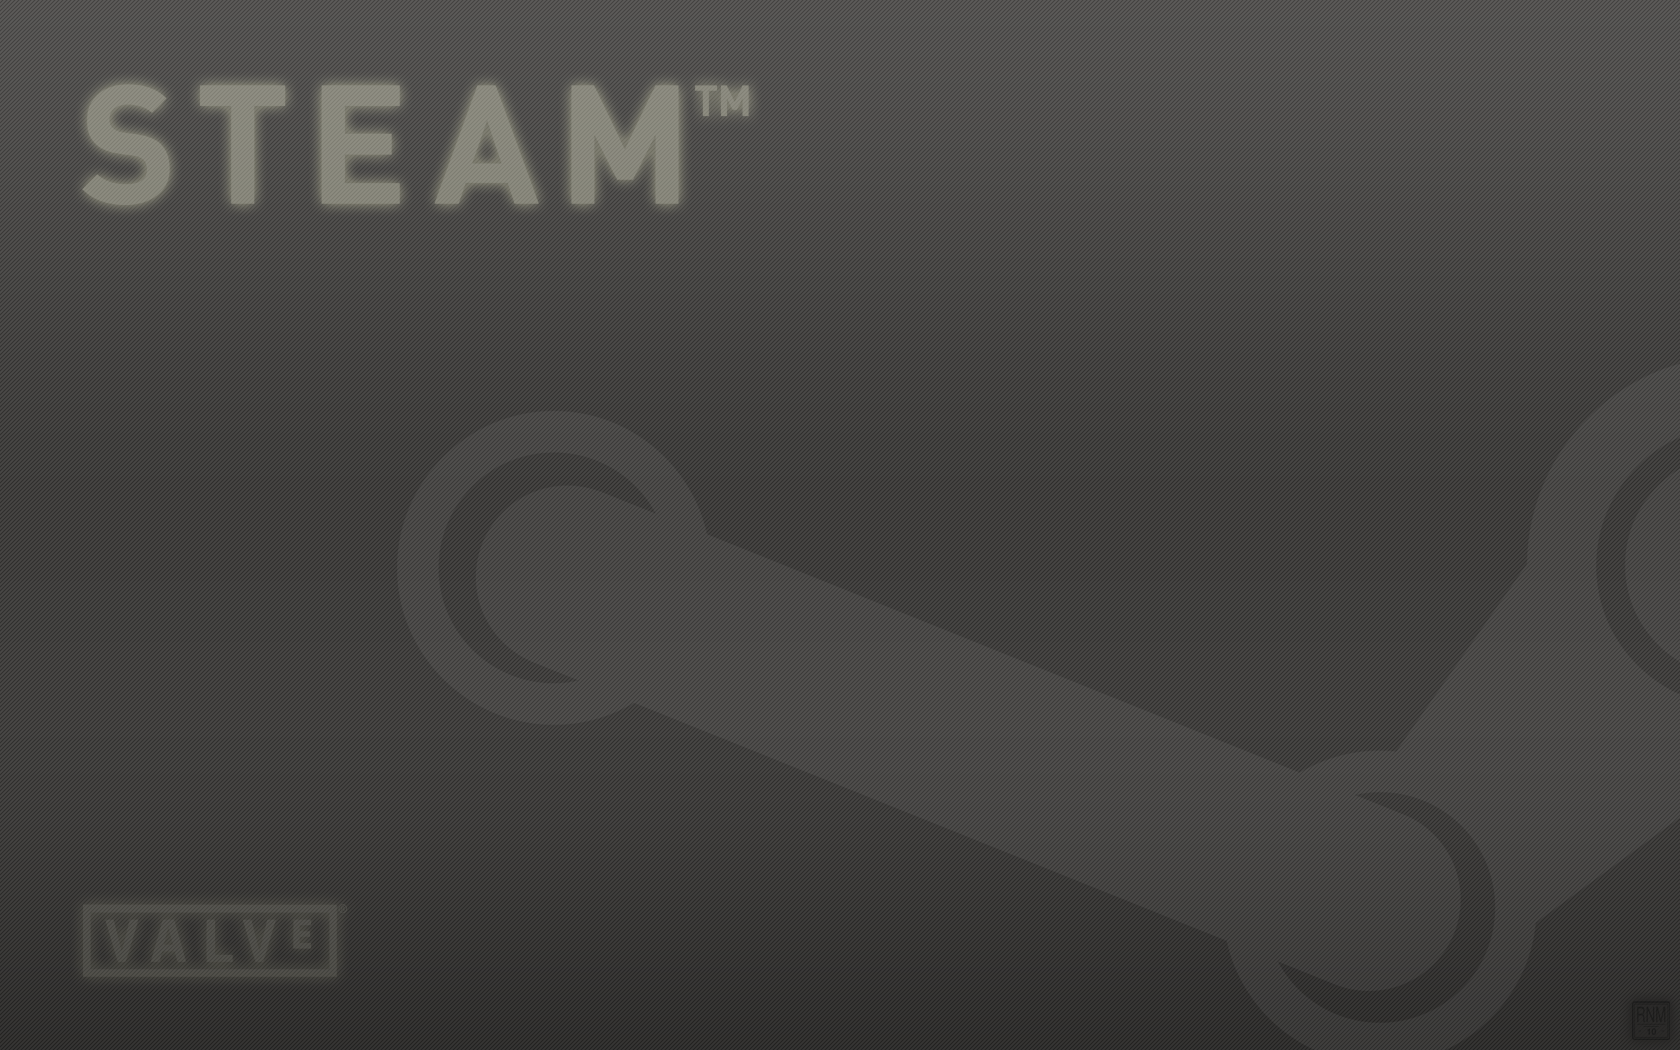 You must start steam фото 112